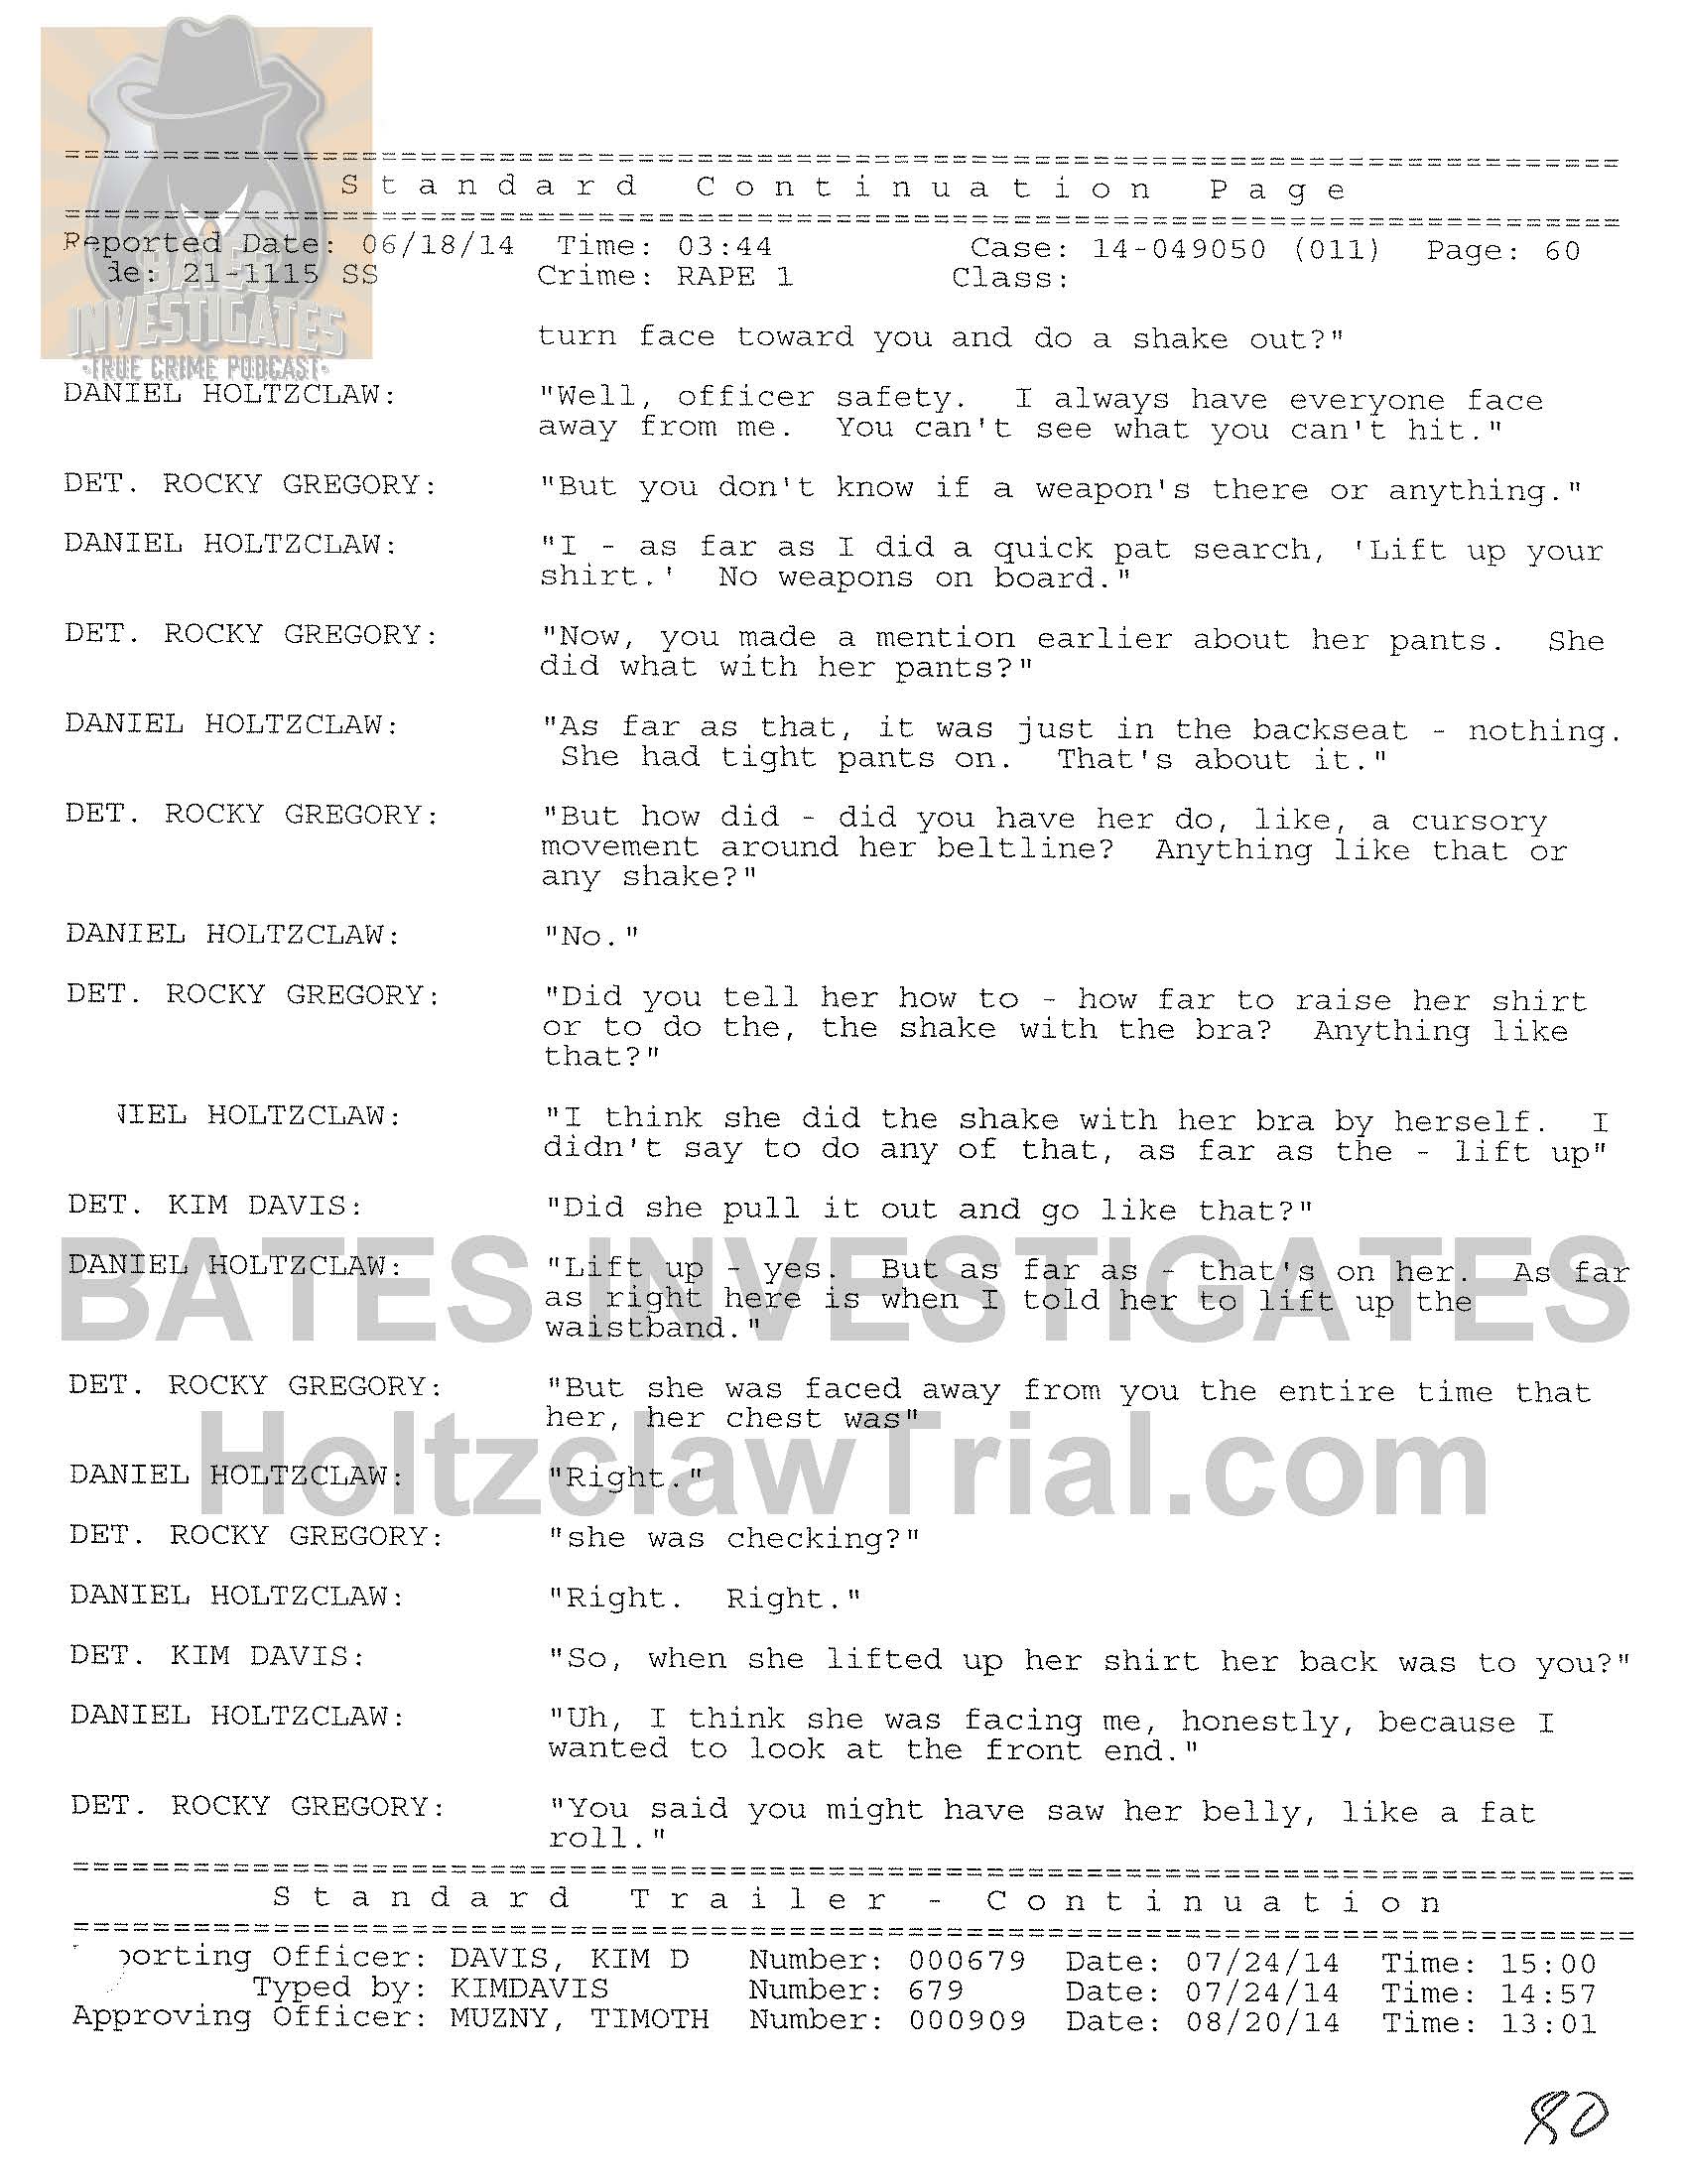 Holtzclaw Interrogation Transcript - Ep02 Redacted_Page_60.jpg